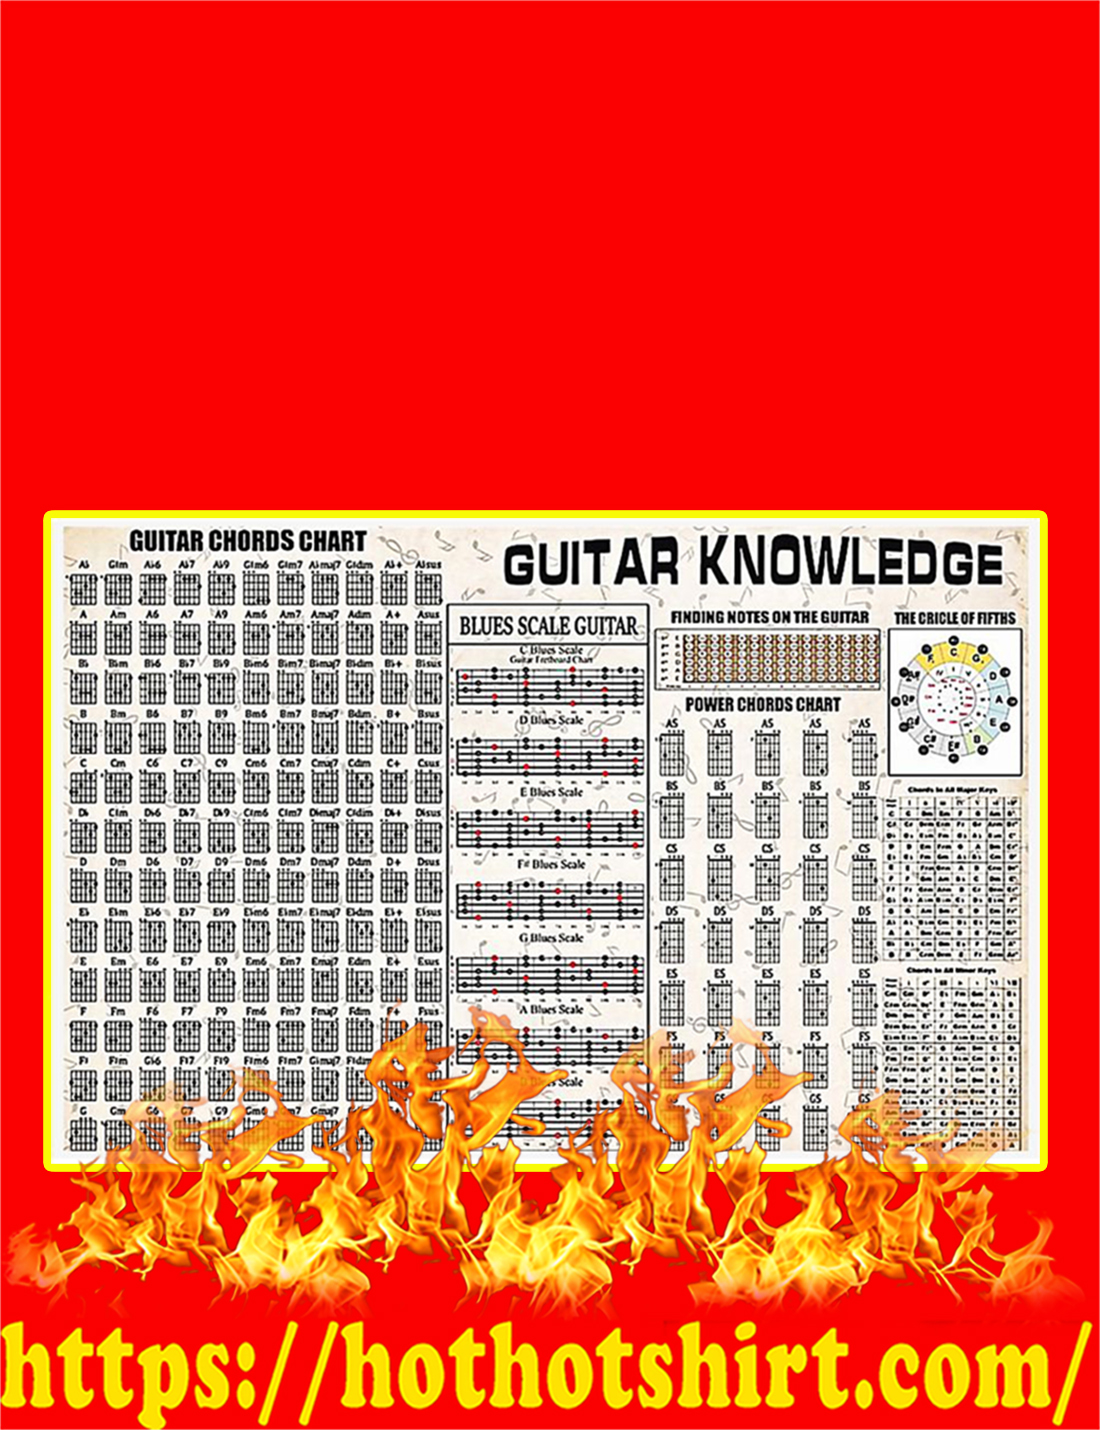 Guitar Knowledge Guitar Chords Chart Poster